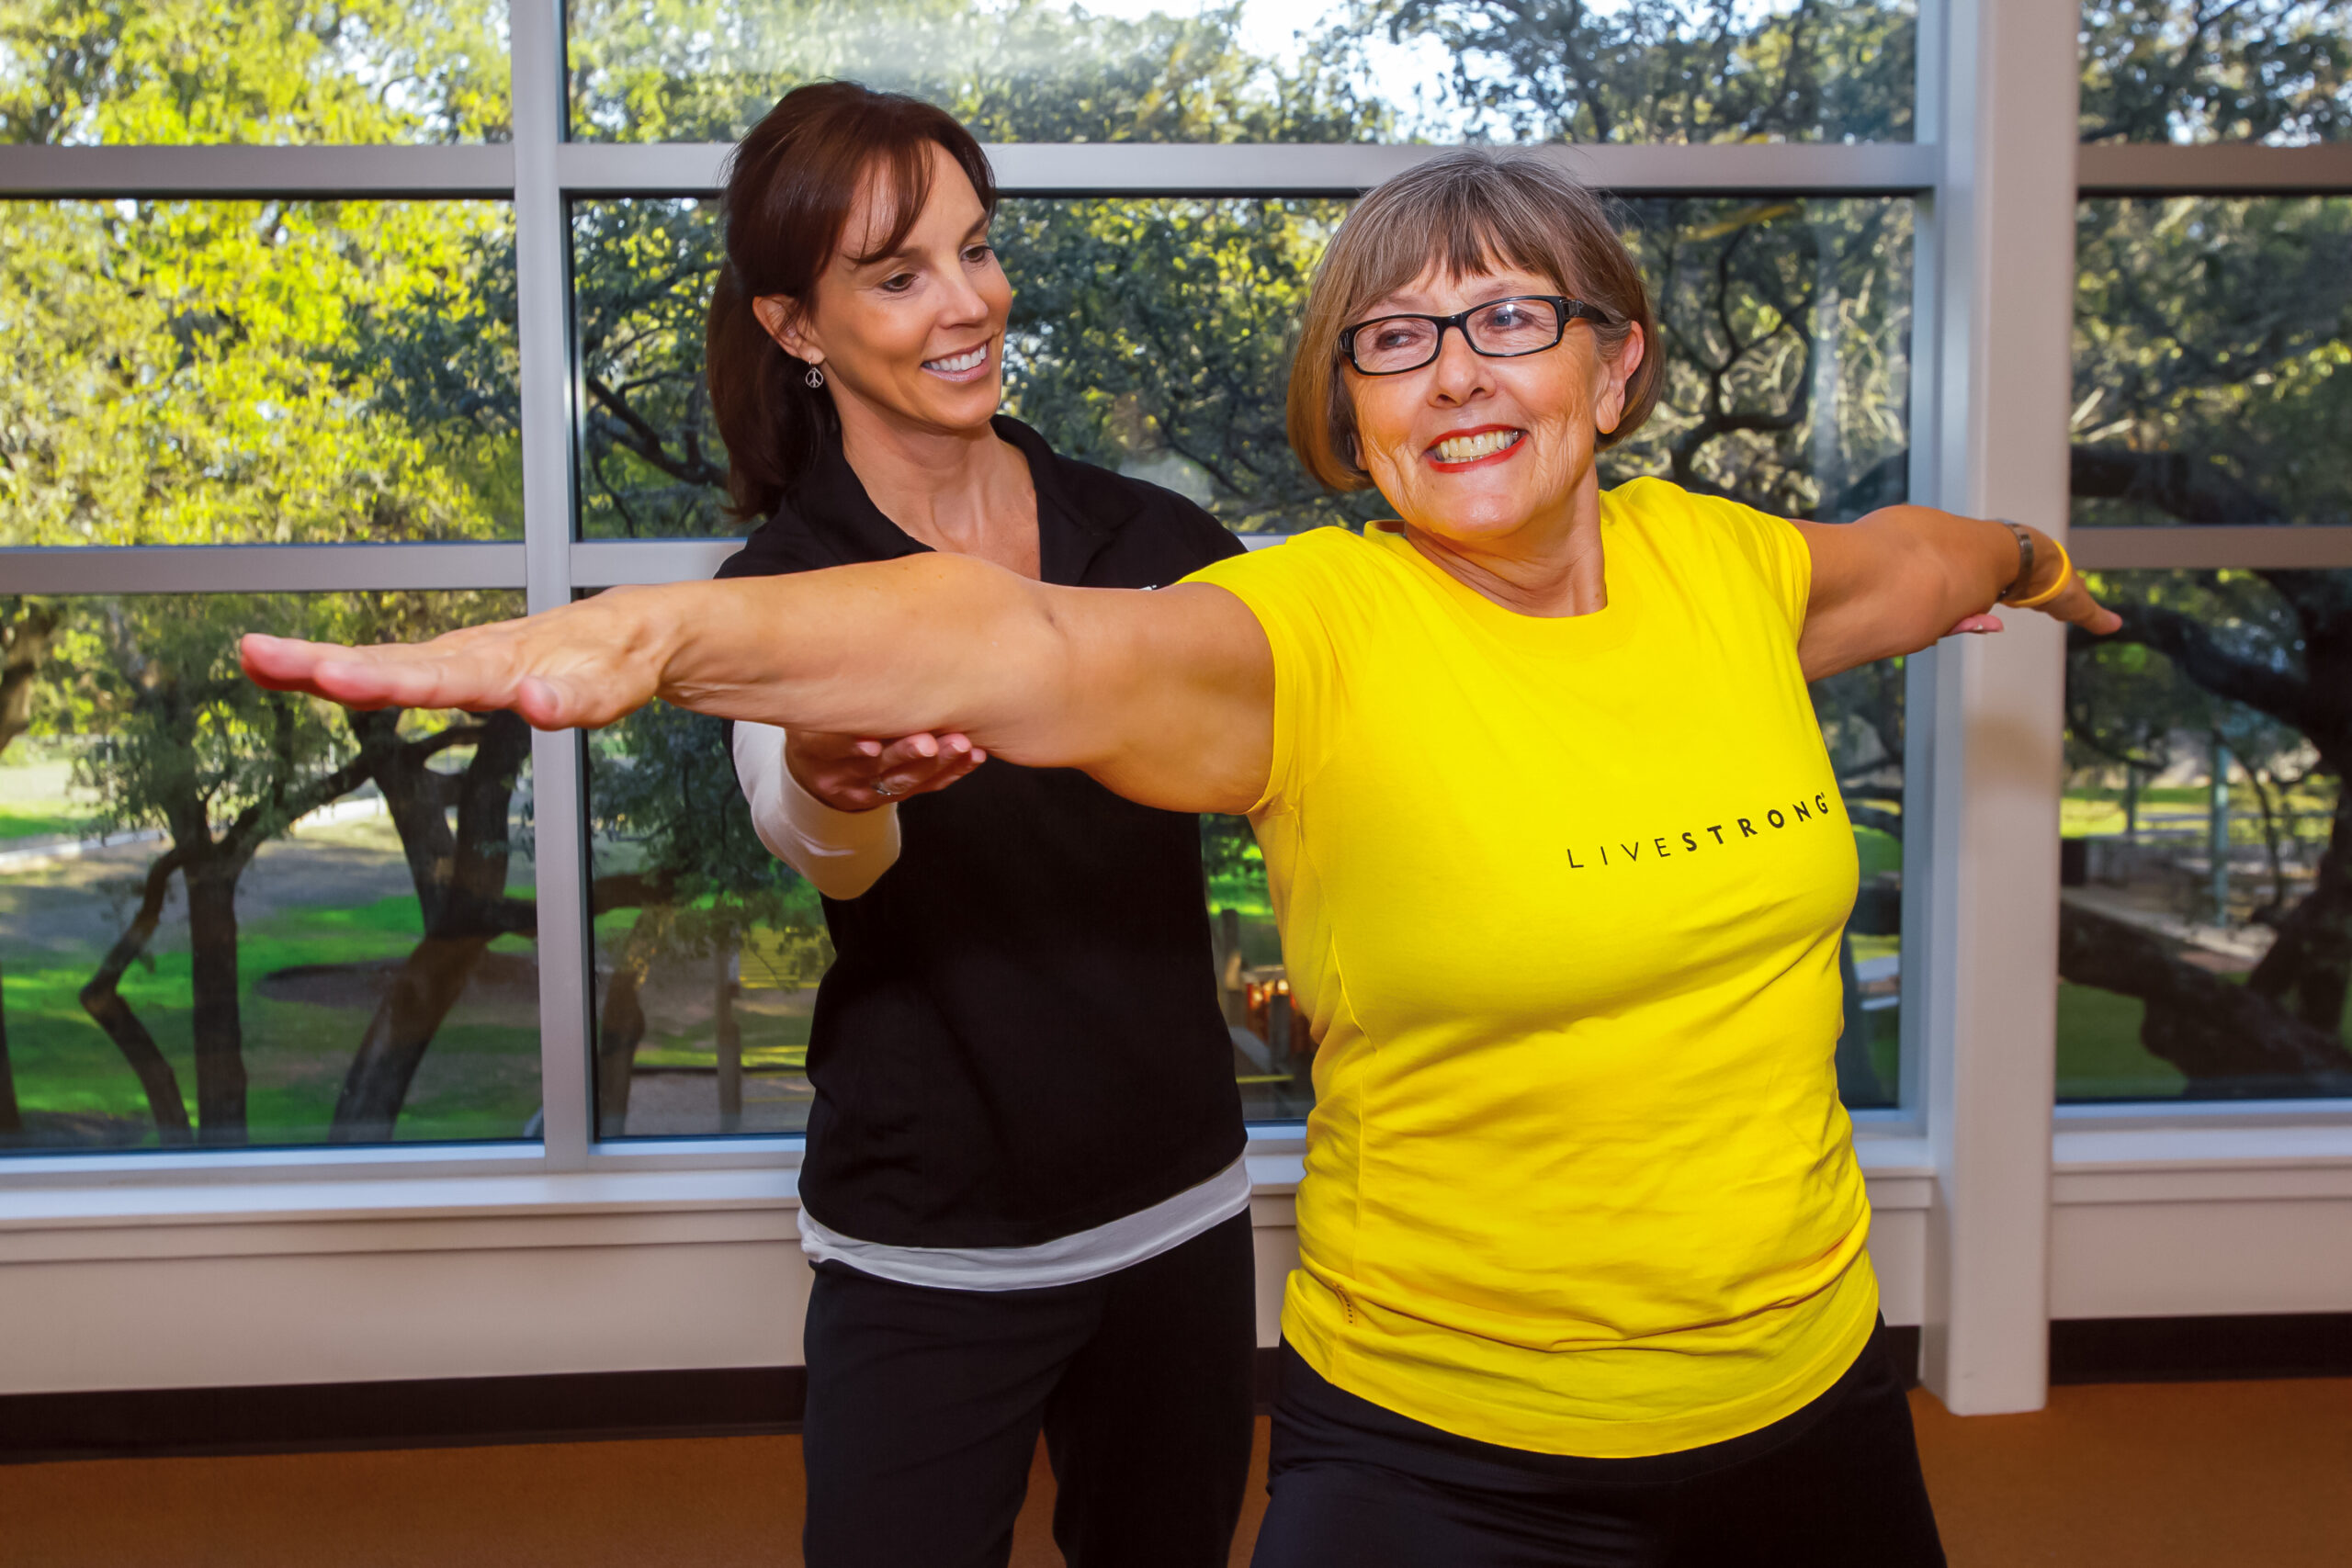 LIVESTRONG AT THE YMCA instructor and female participant available at the Darien YMCA